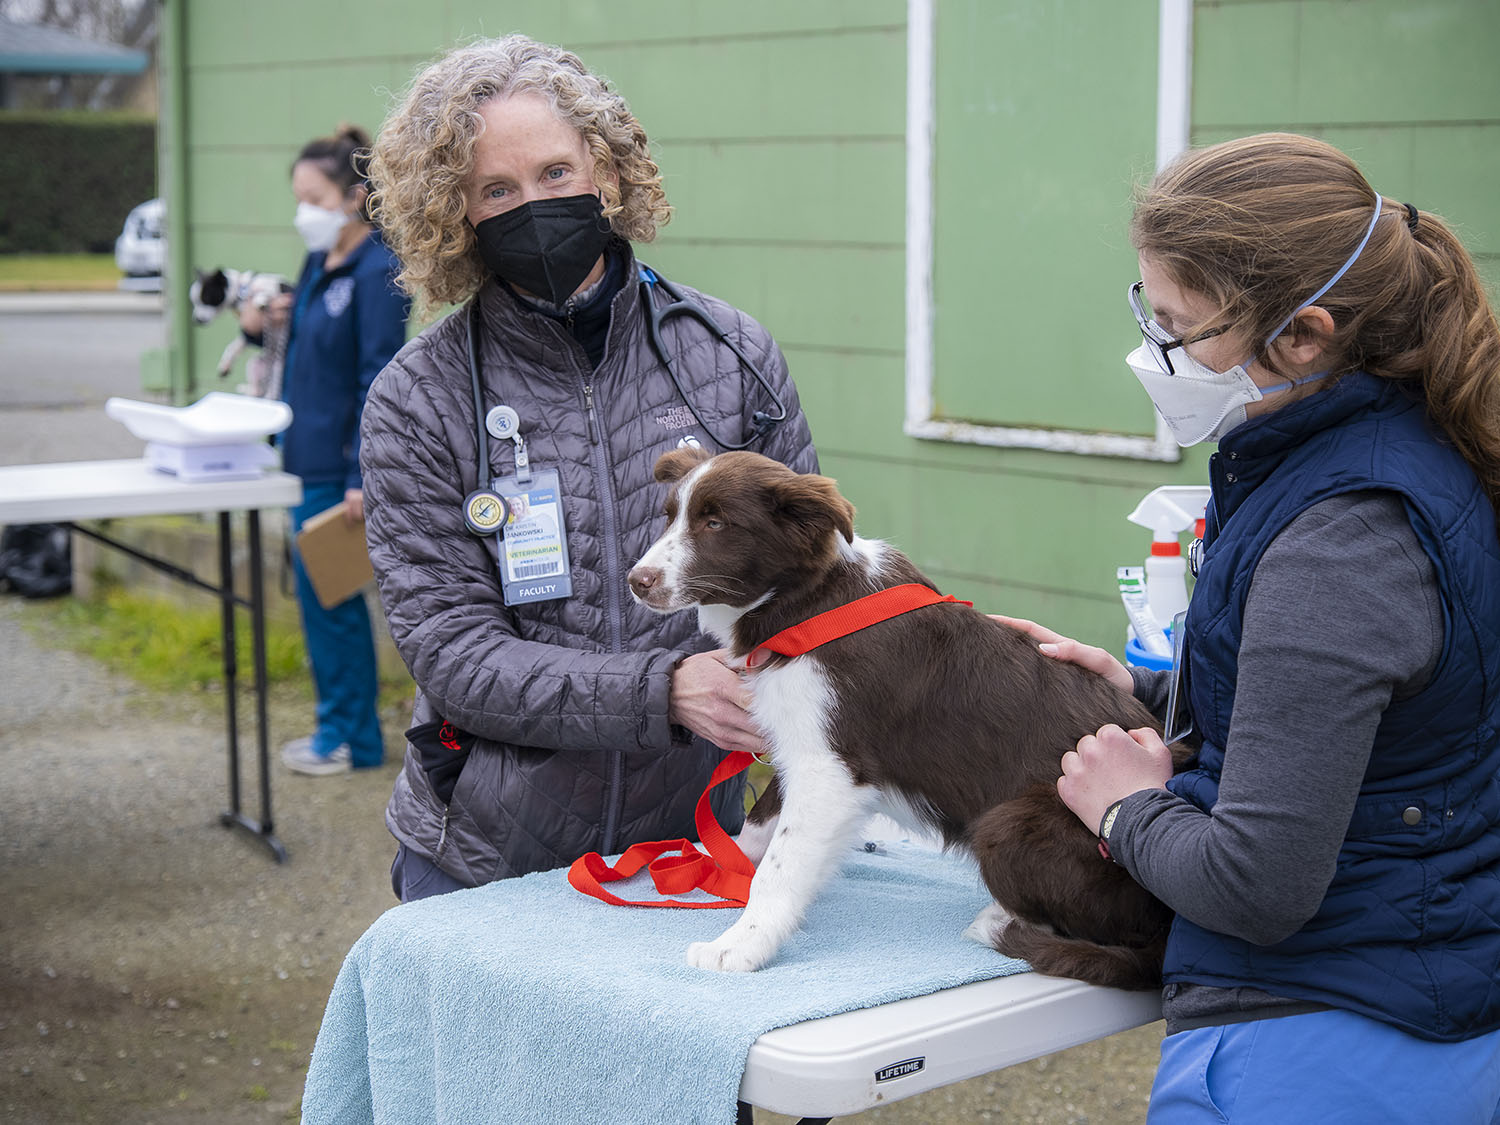 Kristin Jankowski examines a border collie on an exam table outside at Knights Landing One Health Clinic.